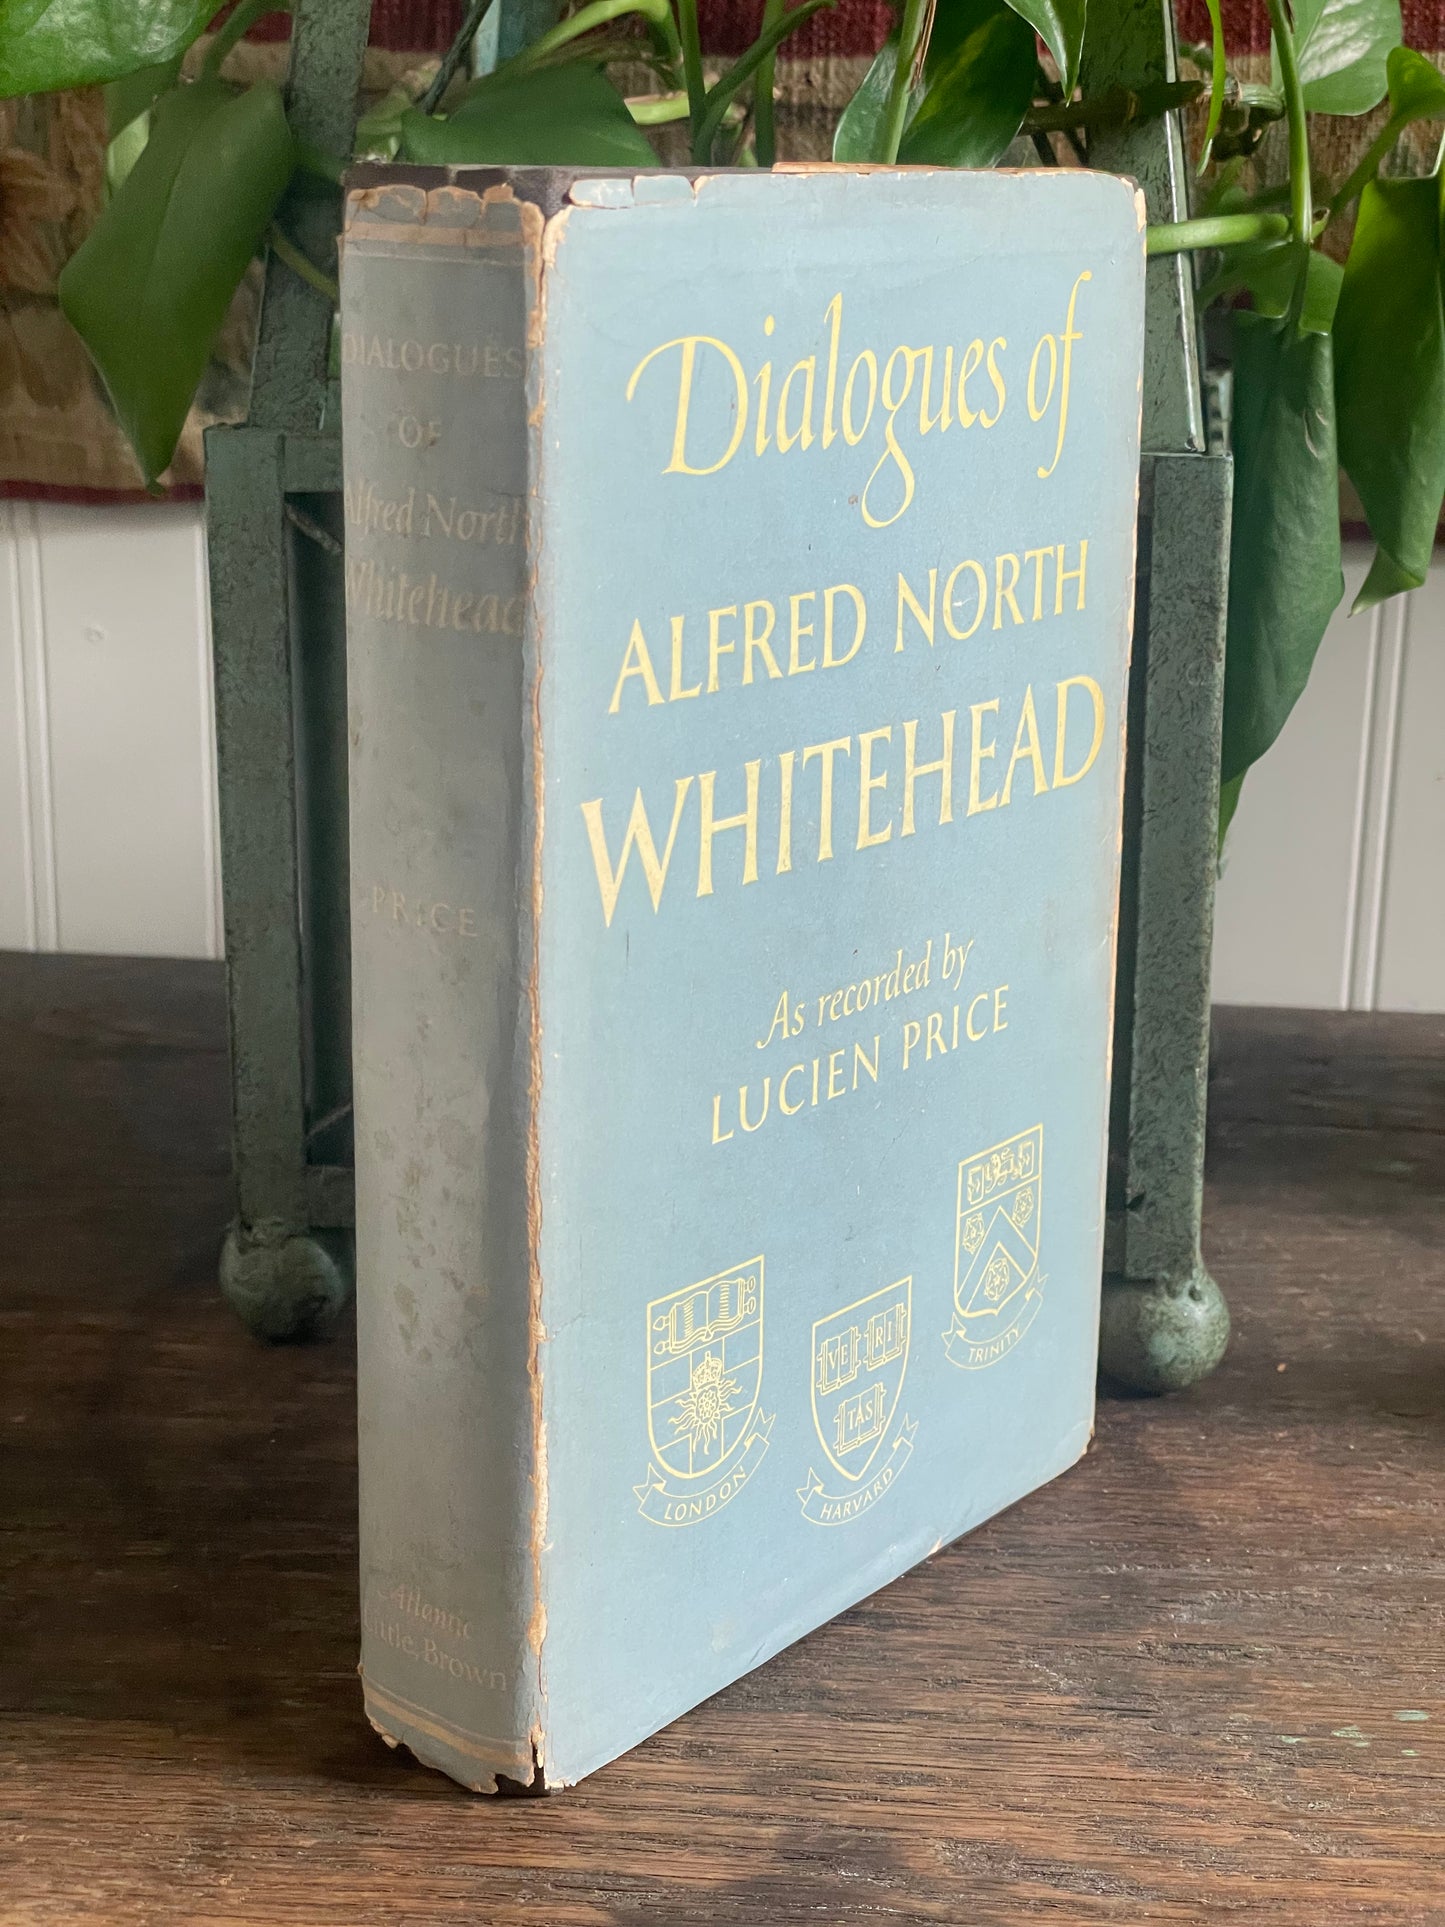 Dialogues of Alfred North Whitehead (1954)